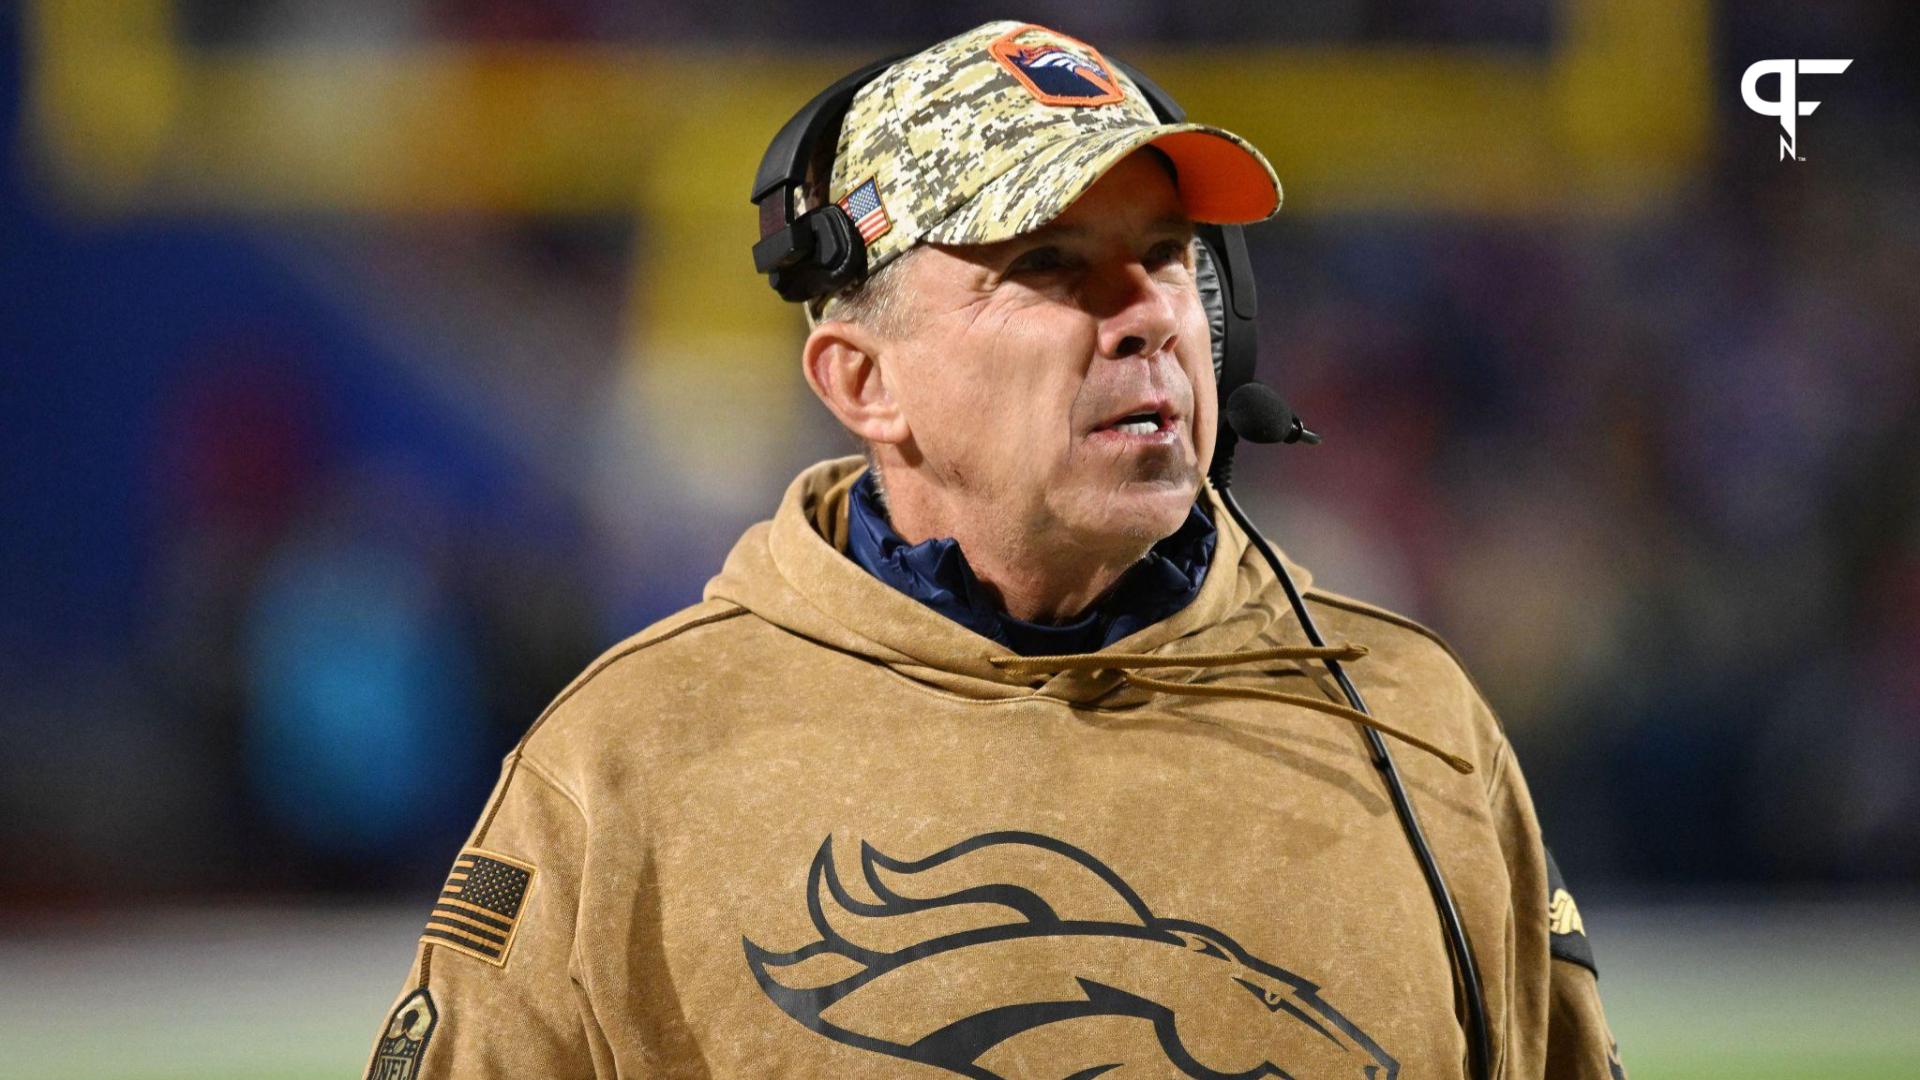 Denver Broncos head coach Sean Payton looks to the scoreboard in the second quarter game against the Buffalo Bills at Highmark Stadium.